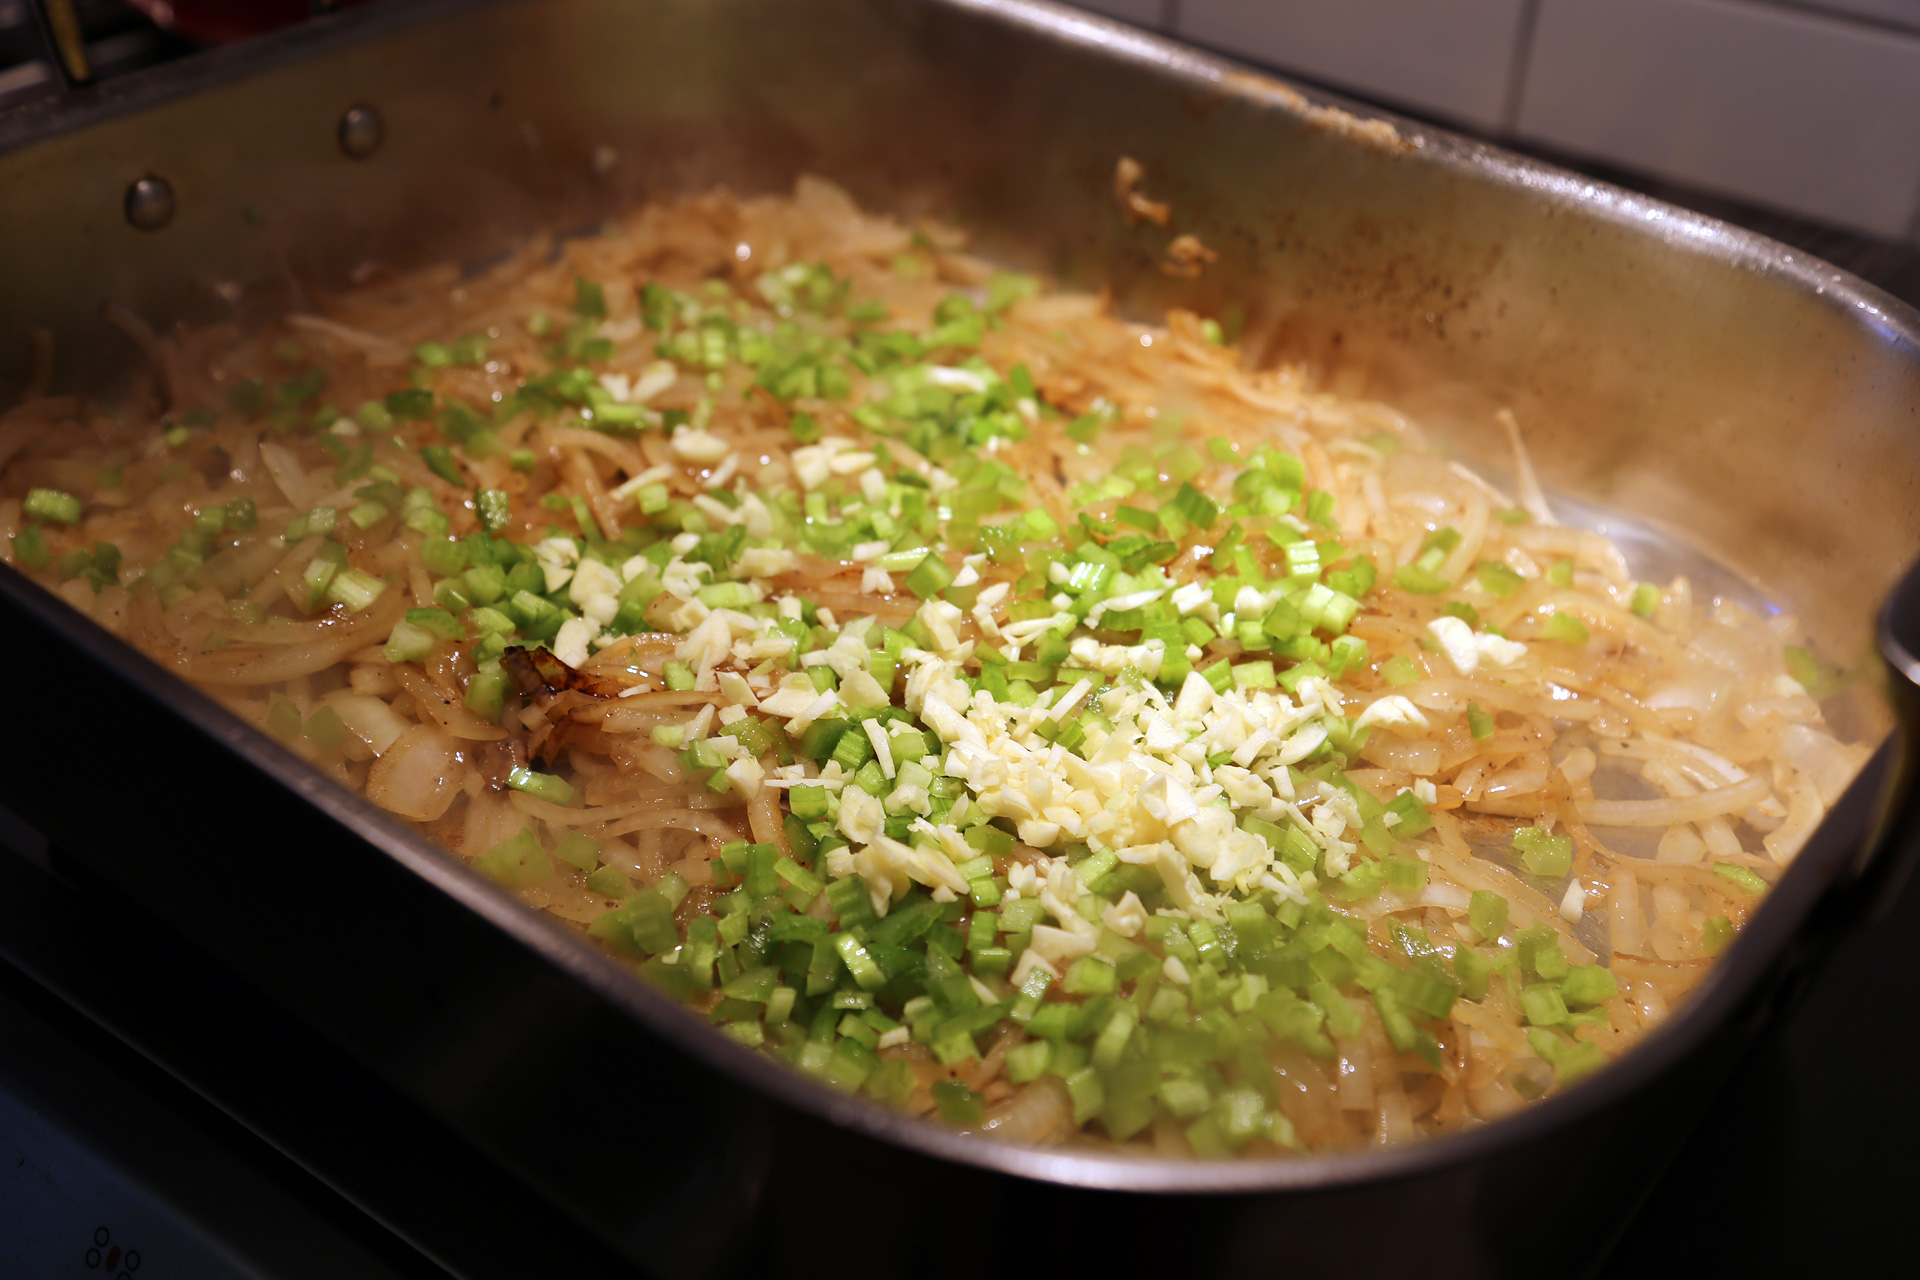 Add the sliced onions to the pan and stir with a wooden spoon to scrape up any browned bits stuck to the bottom. Cook until golden and softened, about 10 minutes. Stir in the celery.